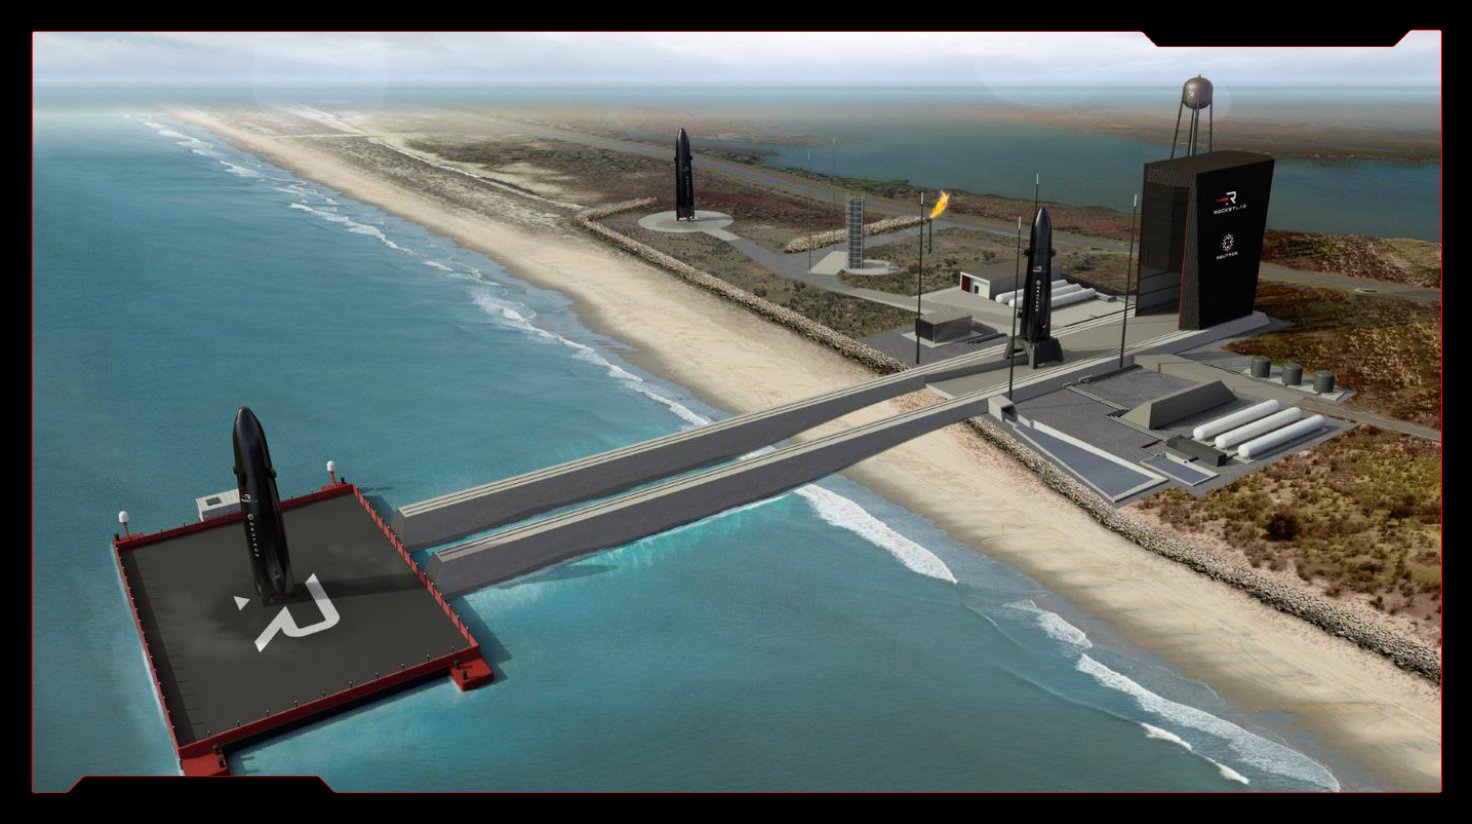 rendering of rocket launch facility at the beach